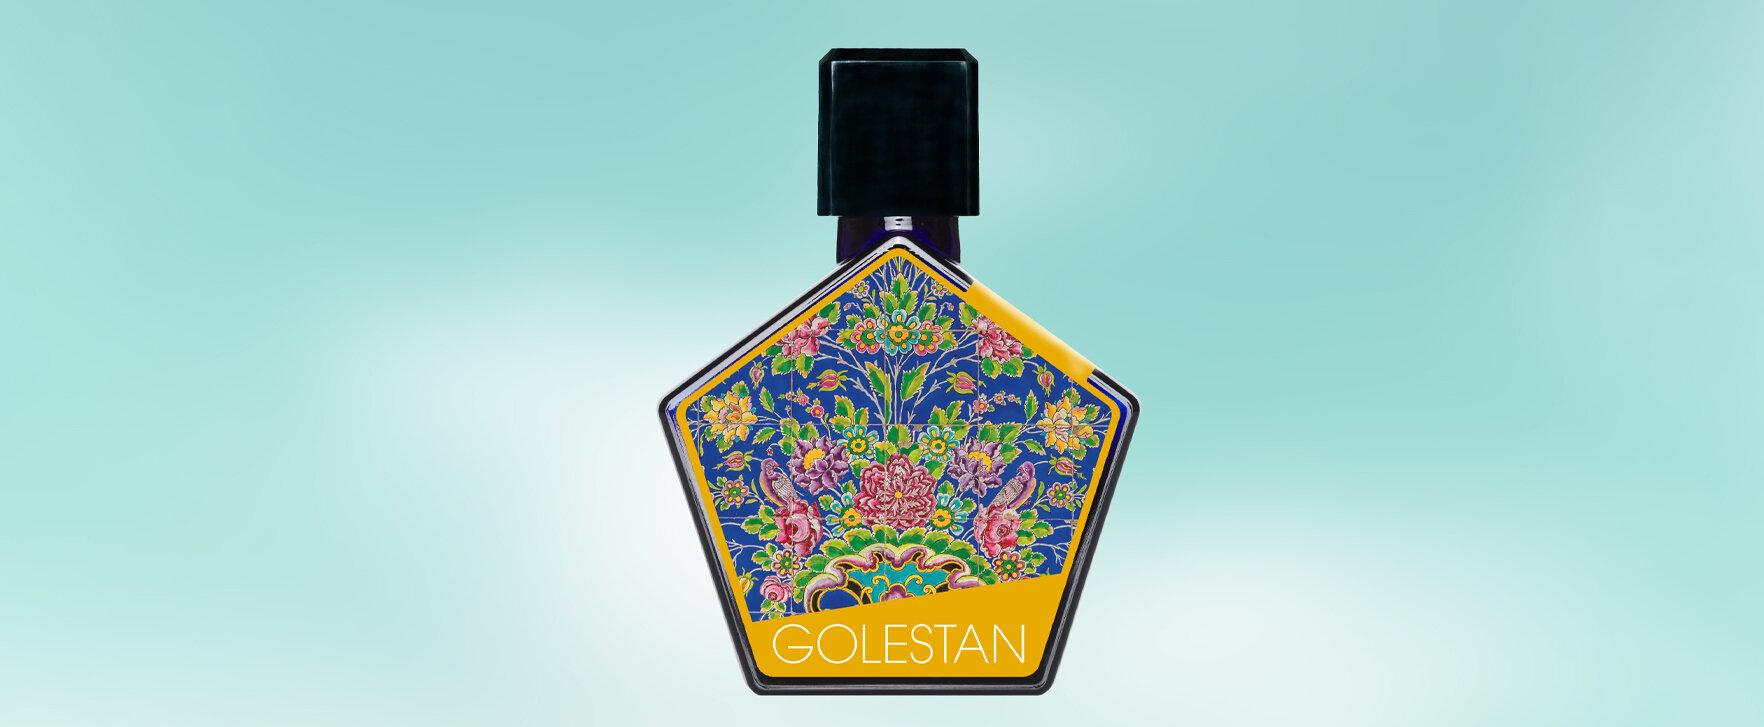 “Golestan” - New Creation by Andy Tauer